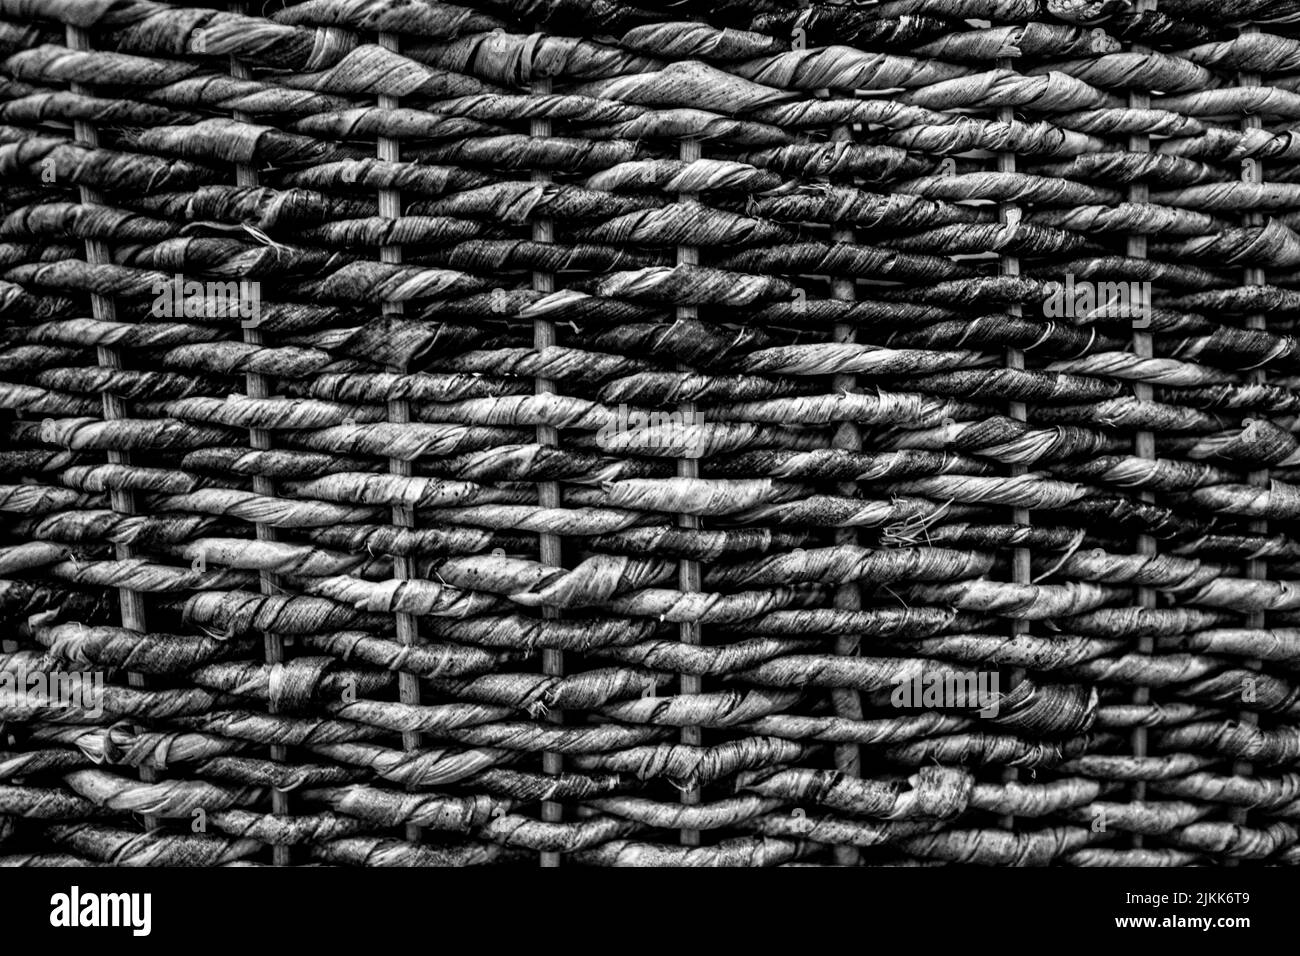 Rope texture Black and White Stock Photos & Images - Alamy